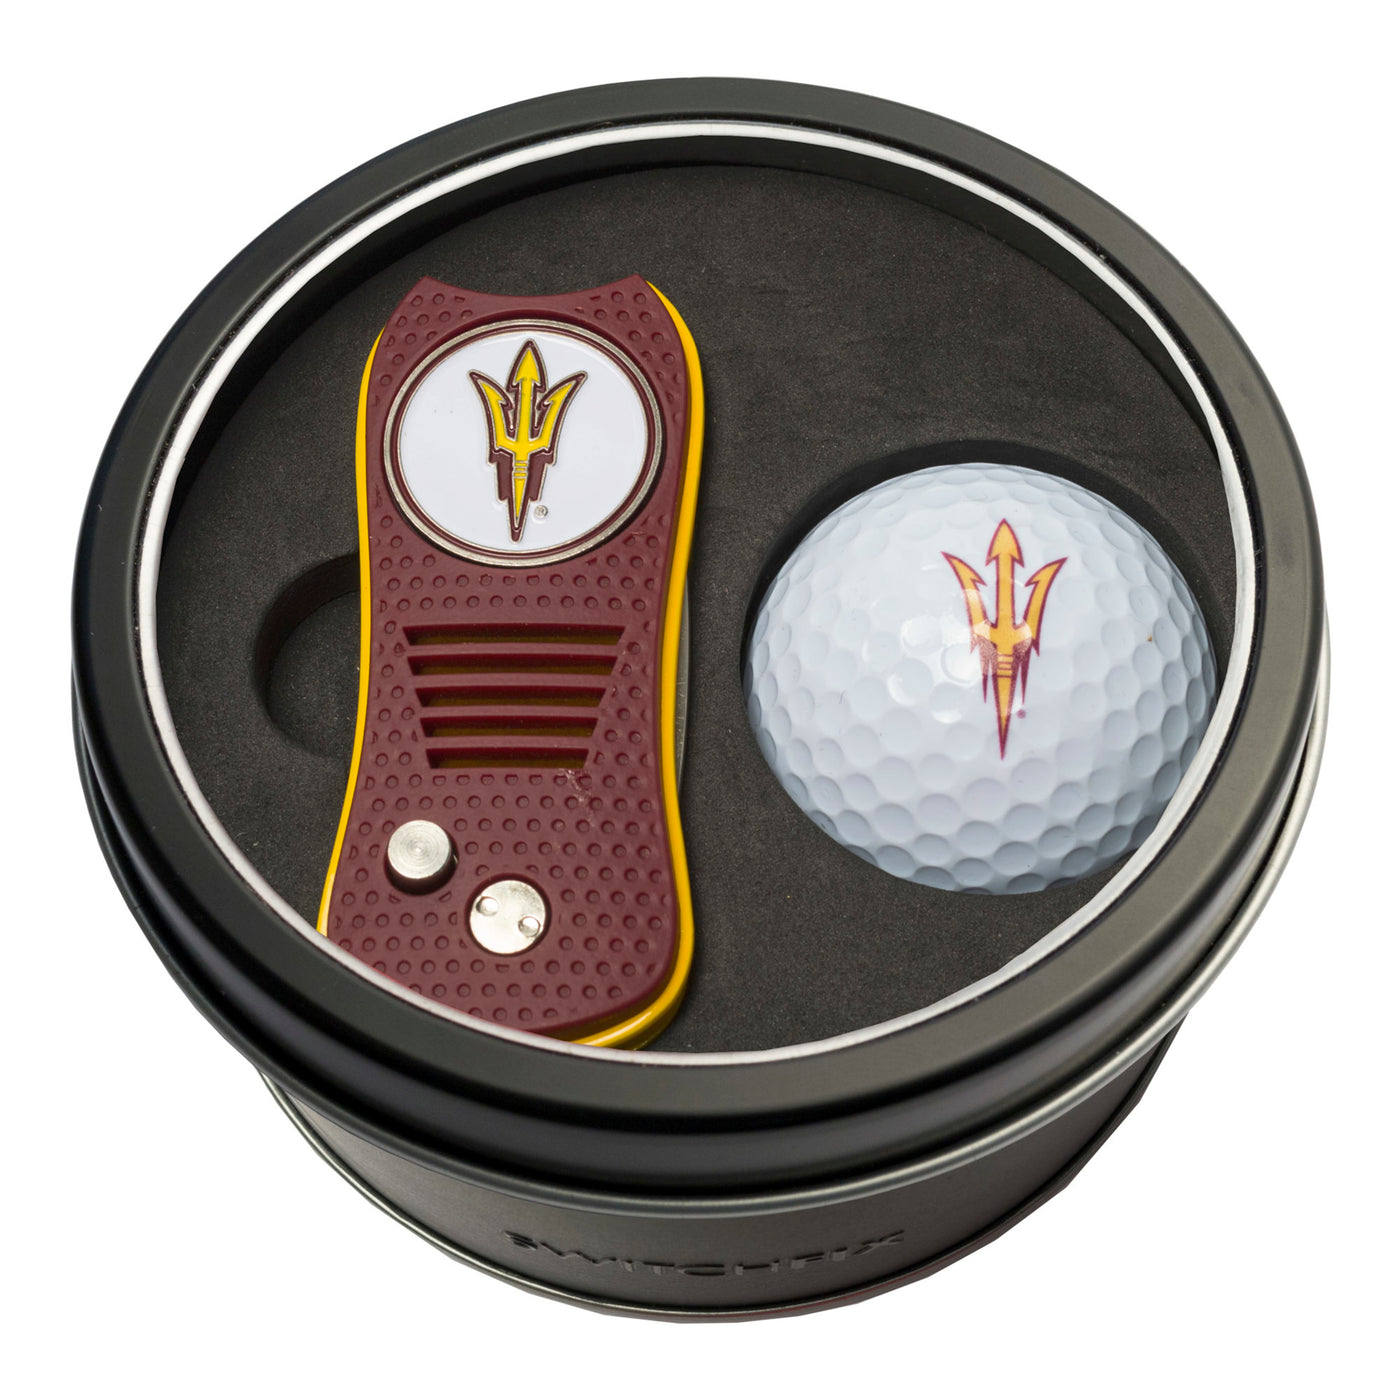 ASU maroon switchblade tool kit and golf ball tin with pitchforks on both